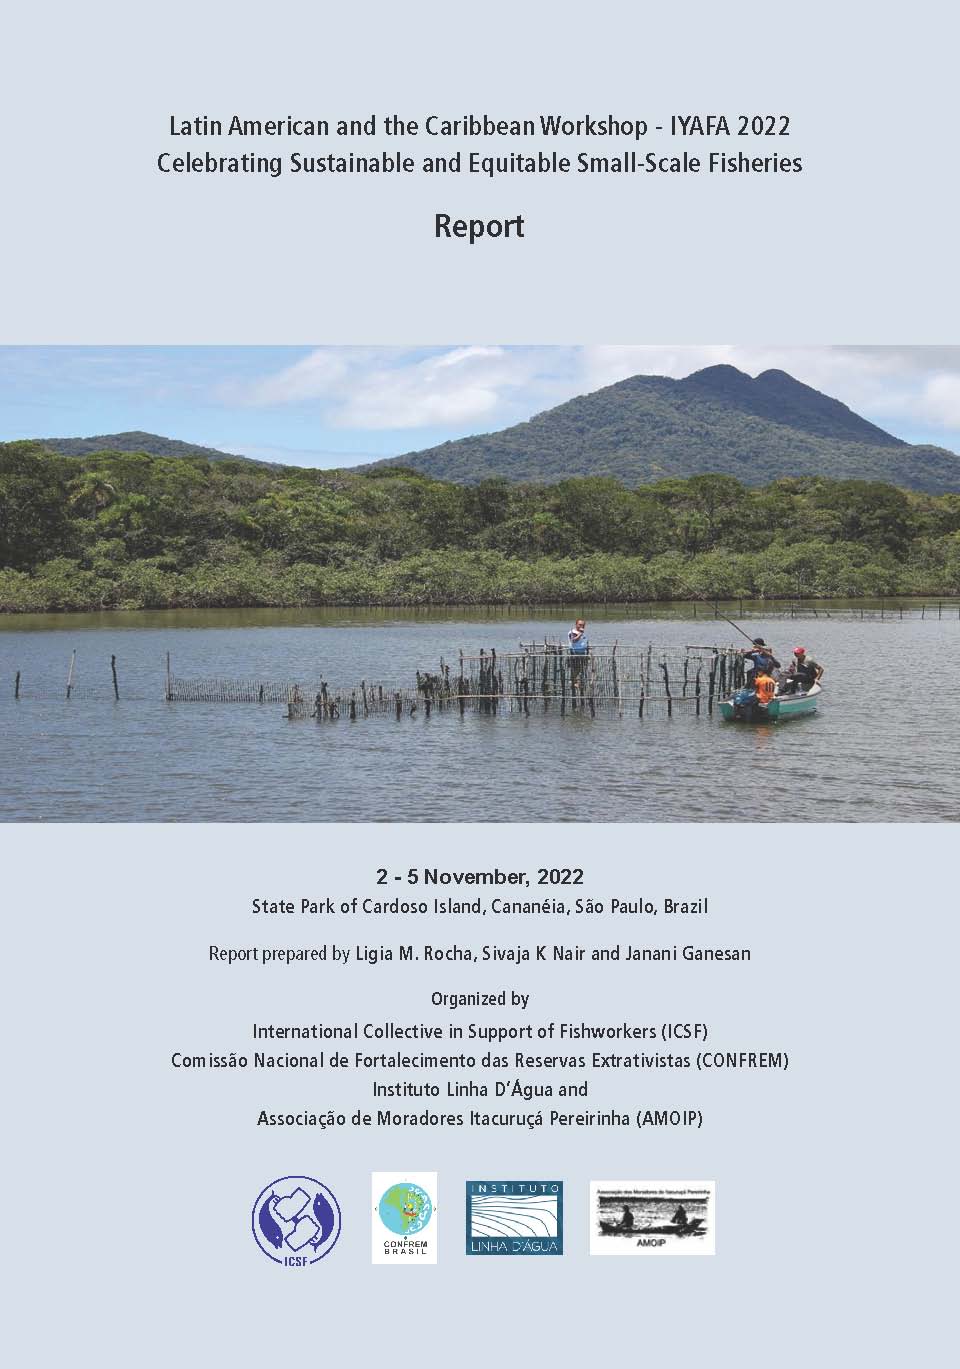 Report on Latin American and Caribbean Workshop – IYAFA 2022: Celebrating Sustainable and Equitable Small-scale Fisheries, 2-5 November 2022, Brazil Report prepared by Ligia M. Rocha, Sivaja K Nair and Janani Ganesan